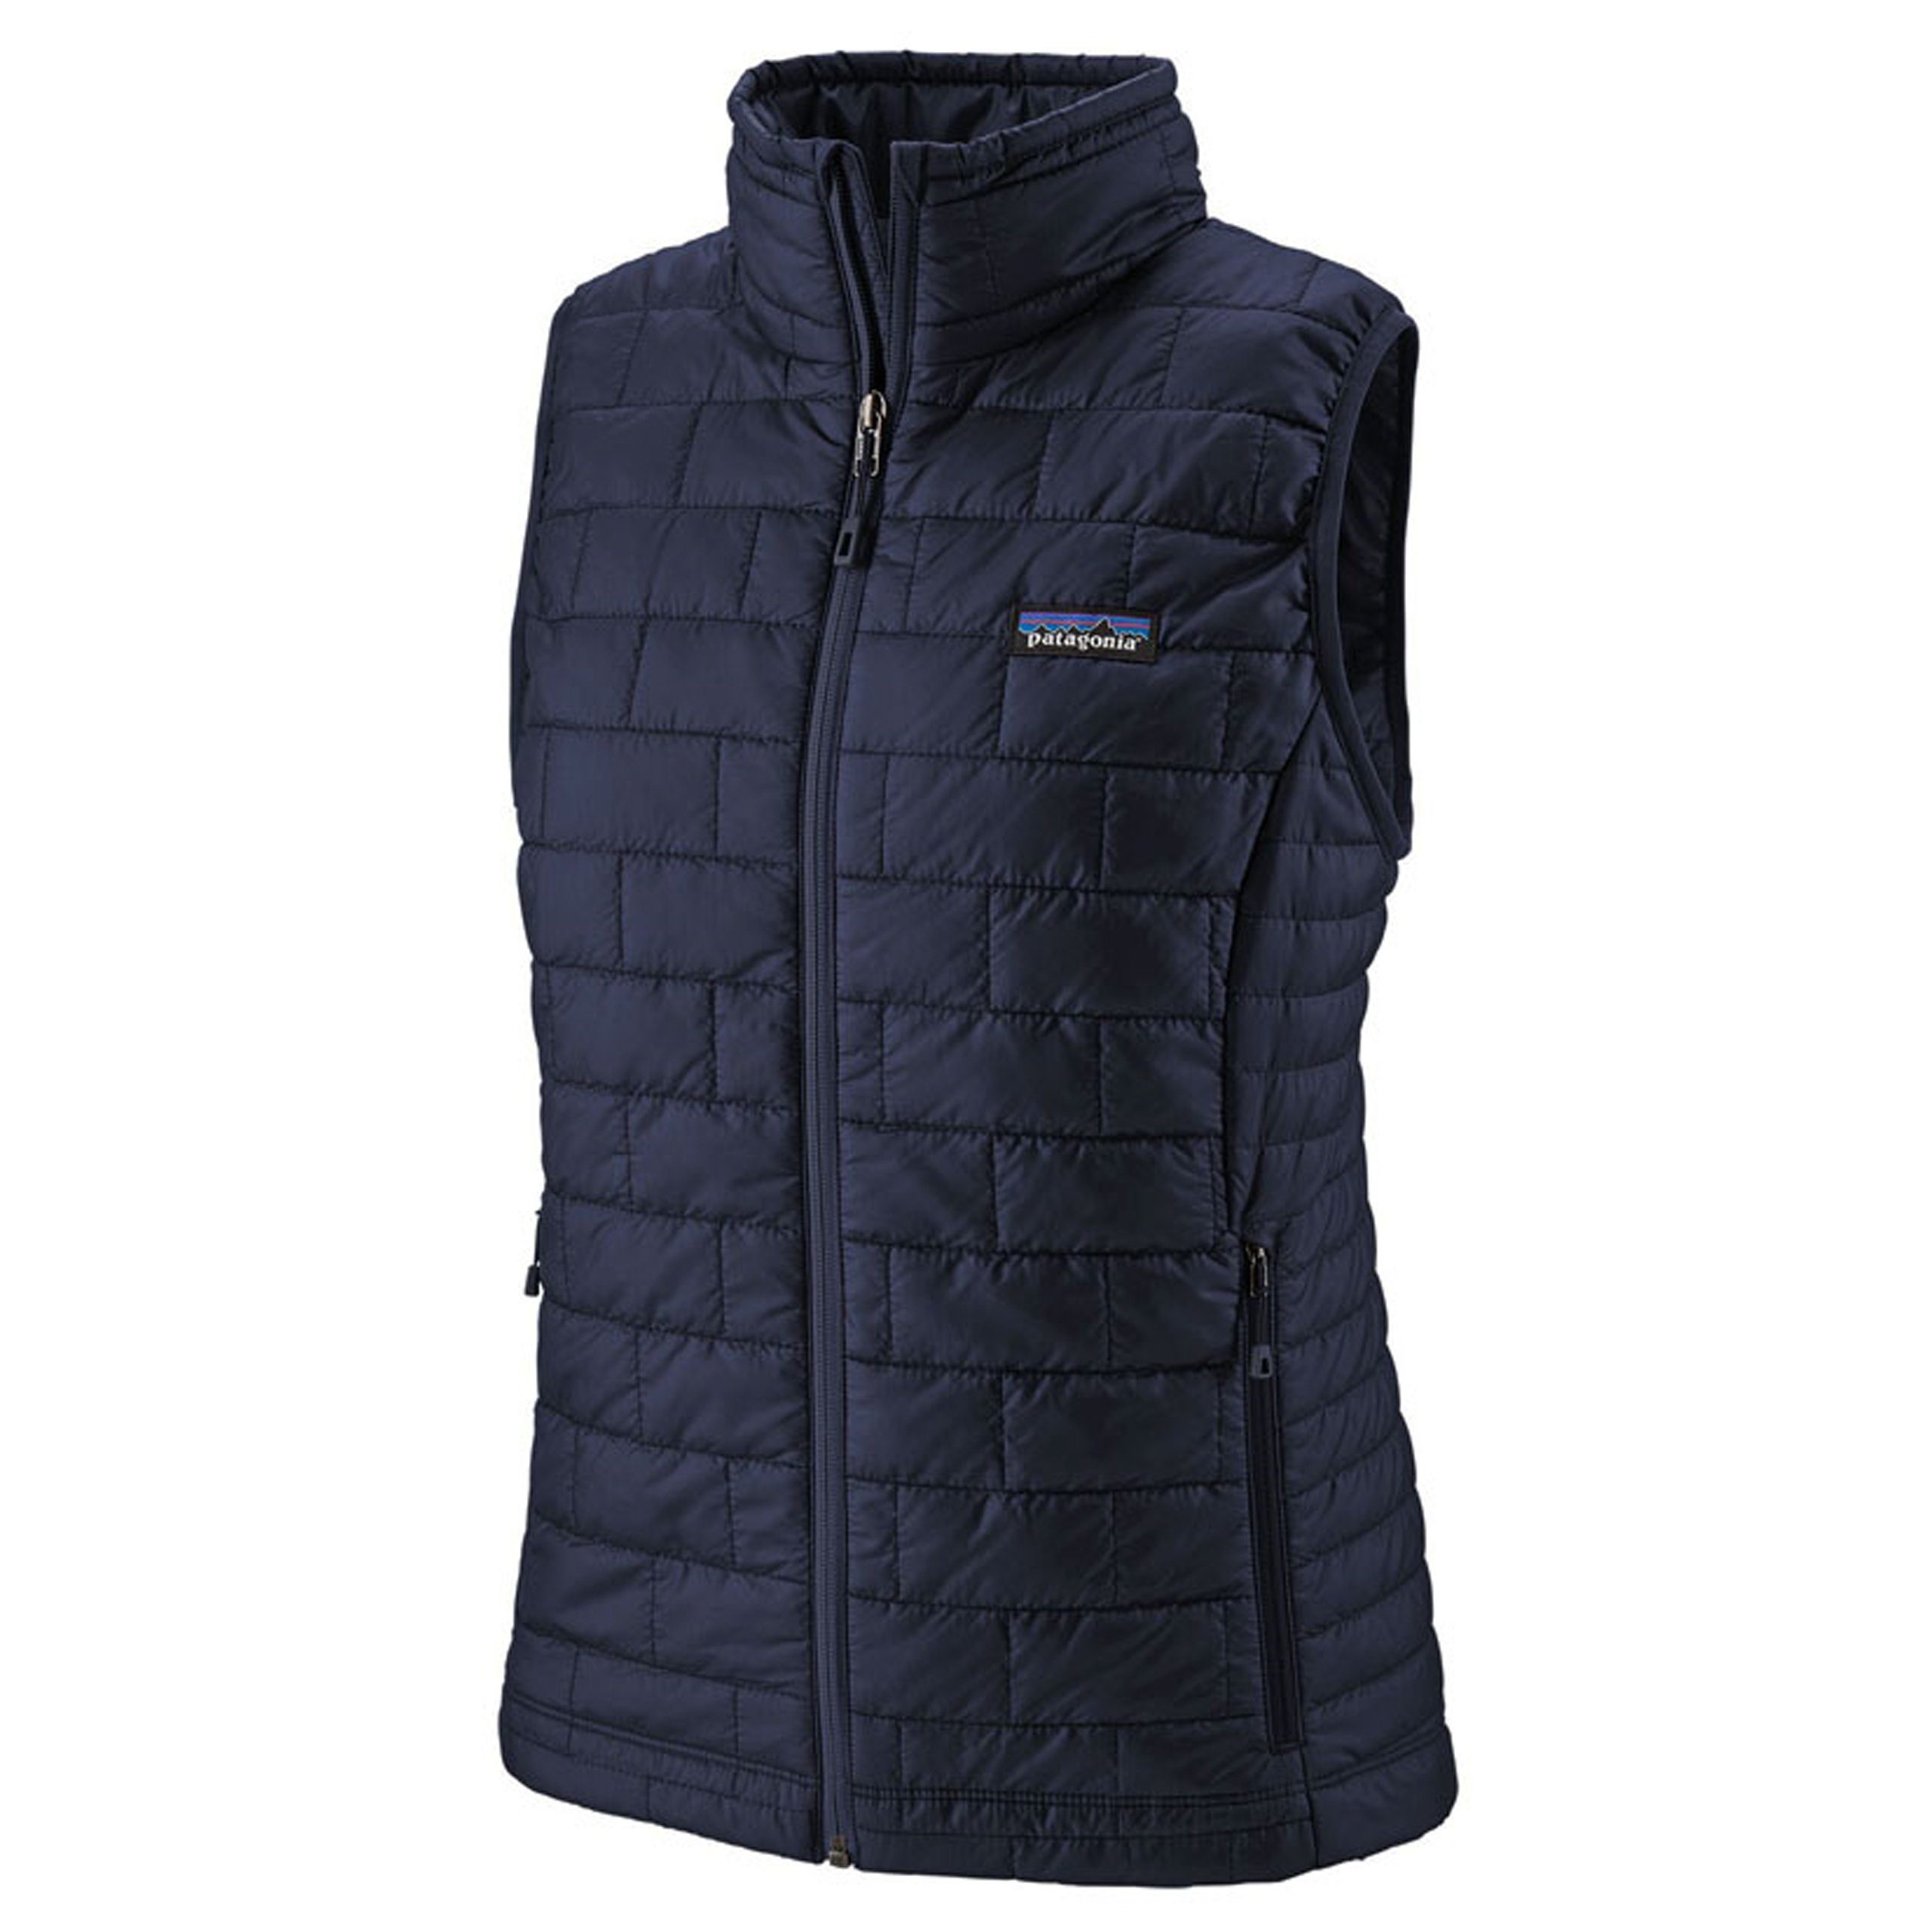 Patagonia Funktionsweste Patagonia Womens Nano Puff Vest - ultraleichte Thermoweste Damen classicnavy